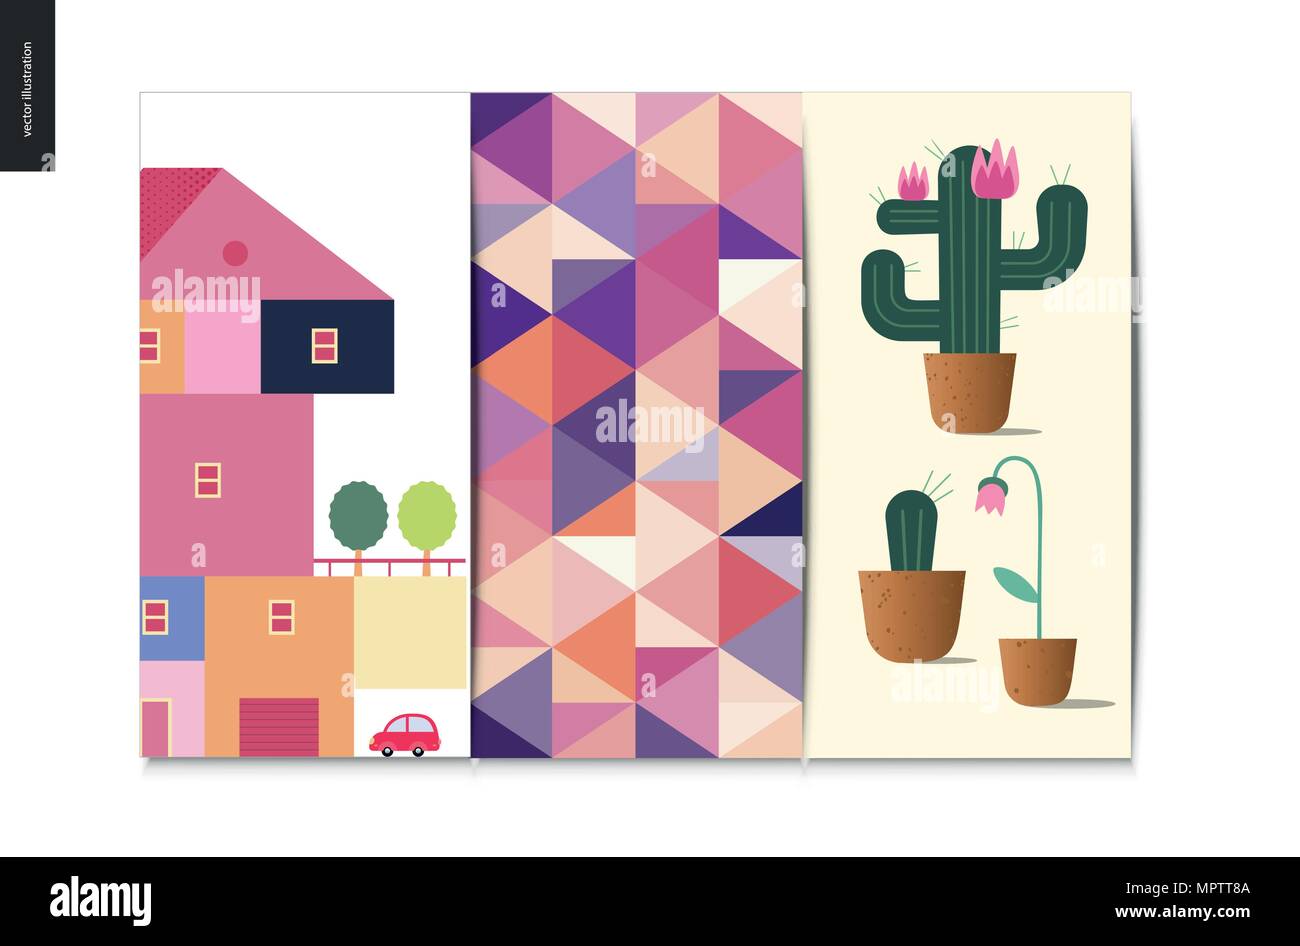 Simple things - postcards - flat cartoon vector illustration of set of colorful countryside house with a terrace and trees, abstract pattern, cactus w Stock Vector